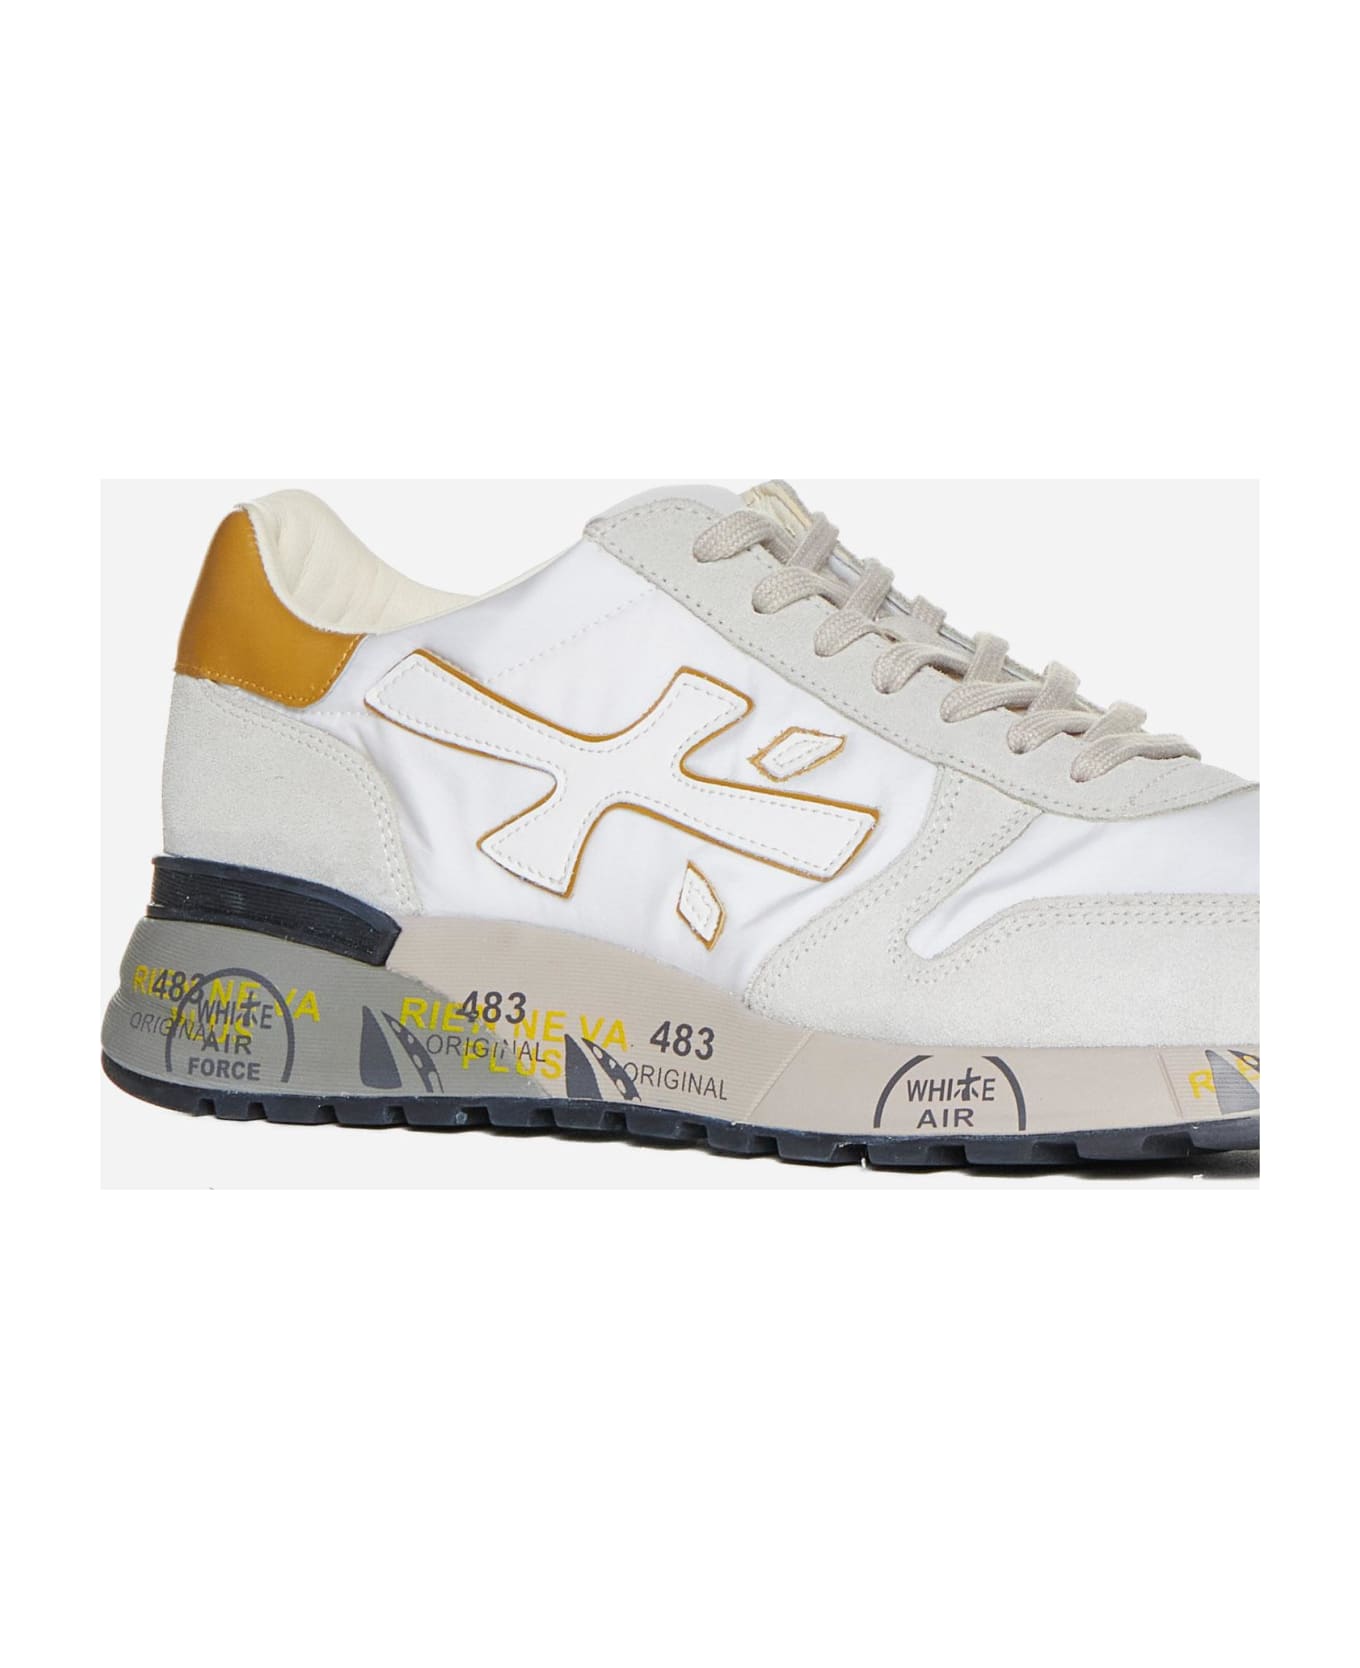 Premiata Mick Suede, Nylon And Leather Sneakers - Offwhite